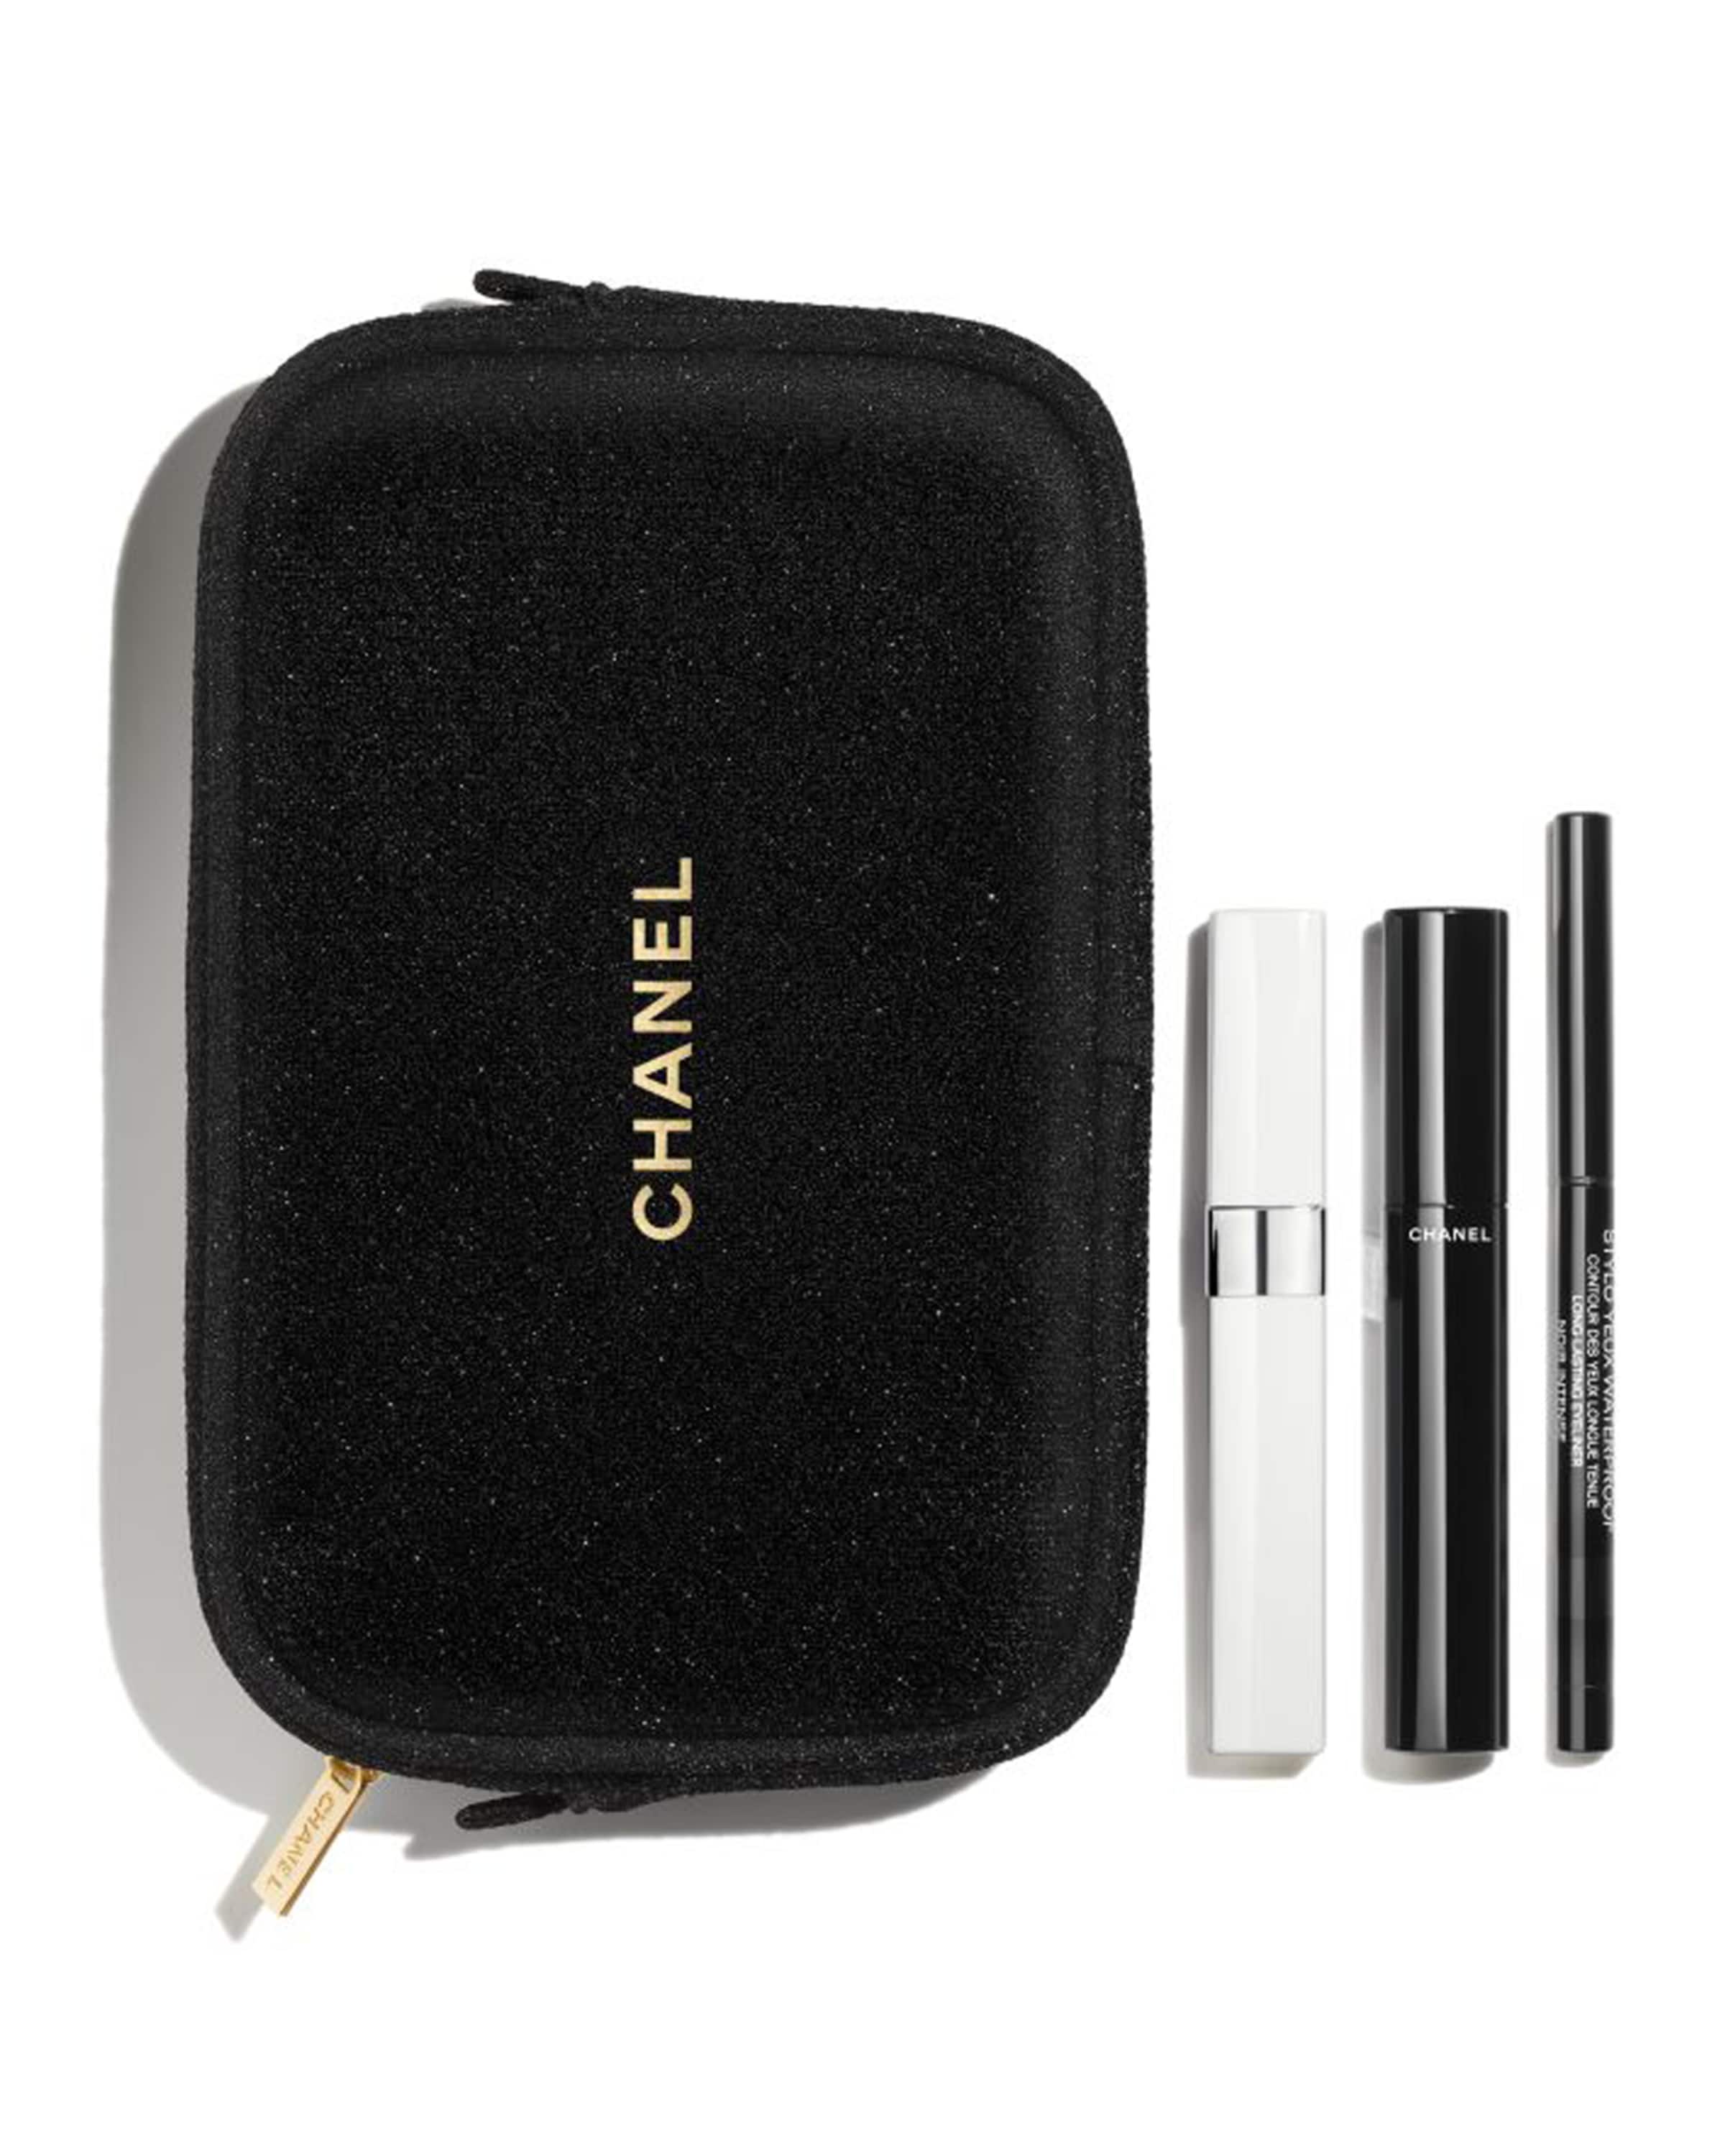 CHANEL EYES TO MESMERIZE Eye Makeup Set - Limited Edition | Neiman Marcus